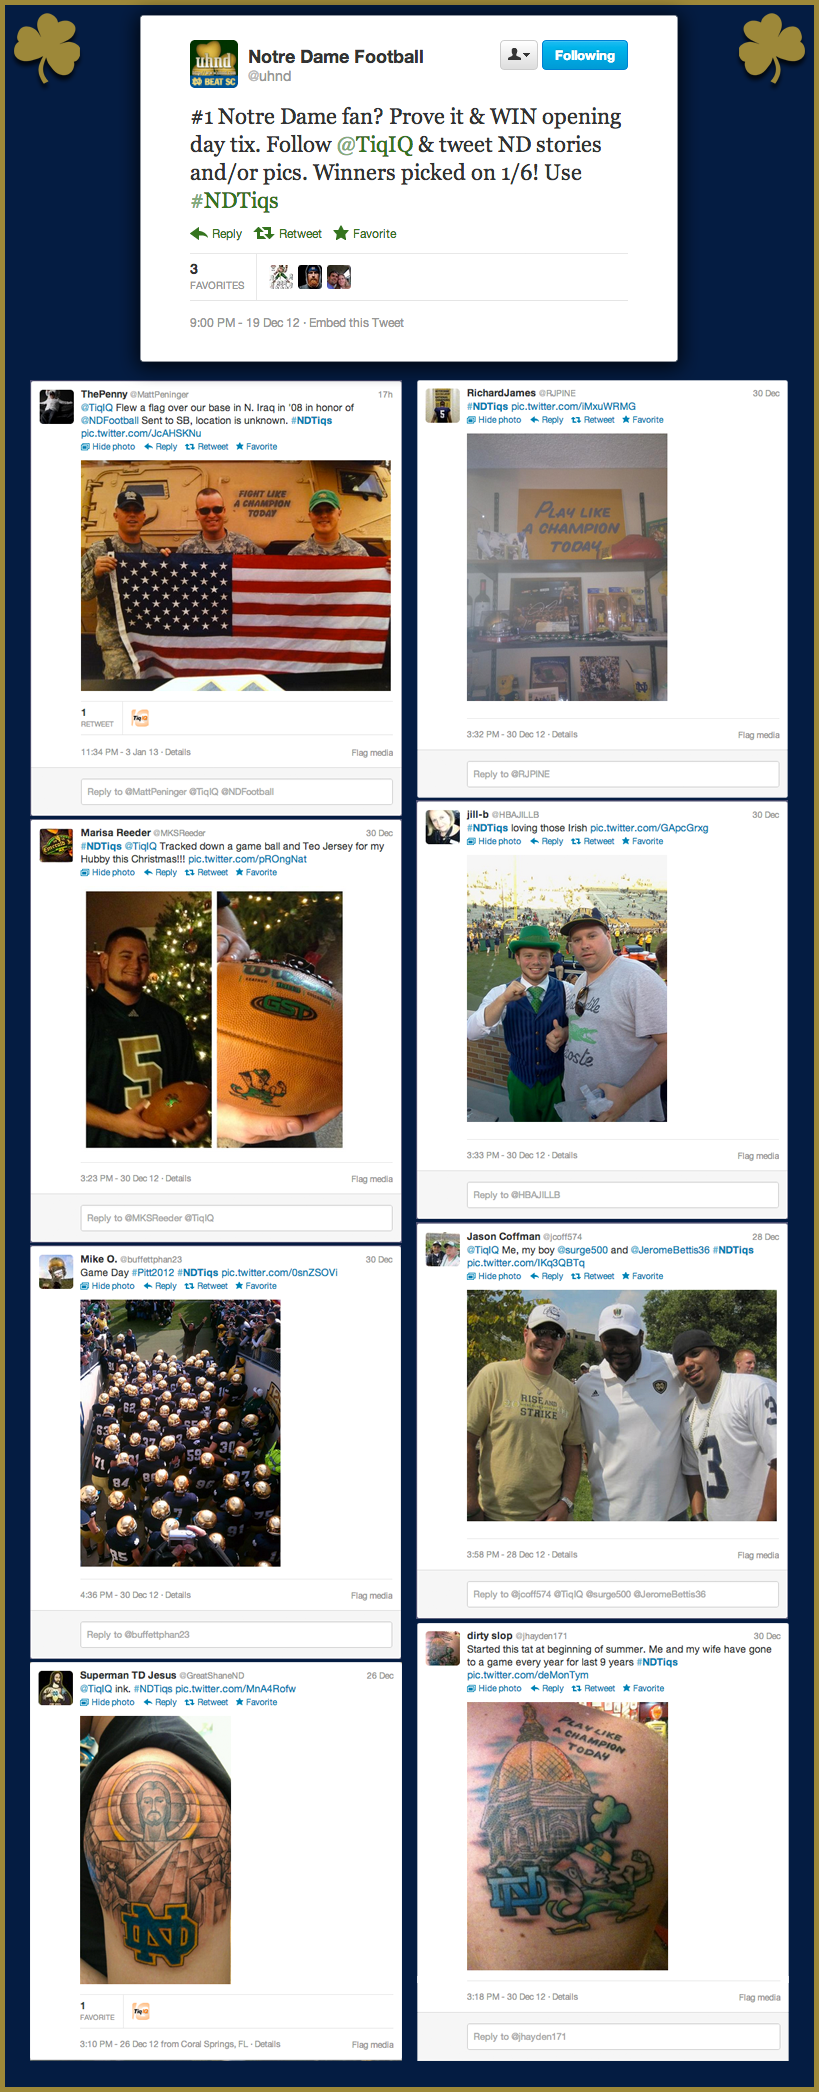 Notre Dame Ticket Contest: Who's the #1 Irish Fan?